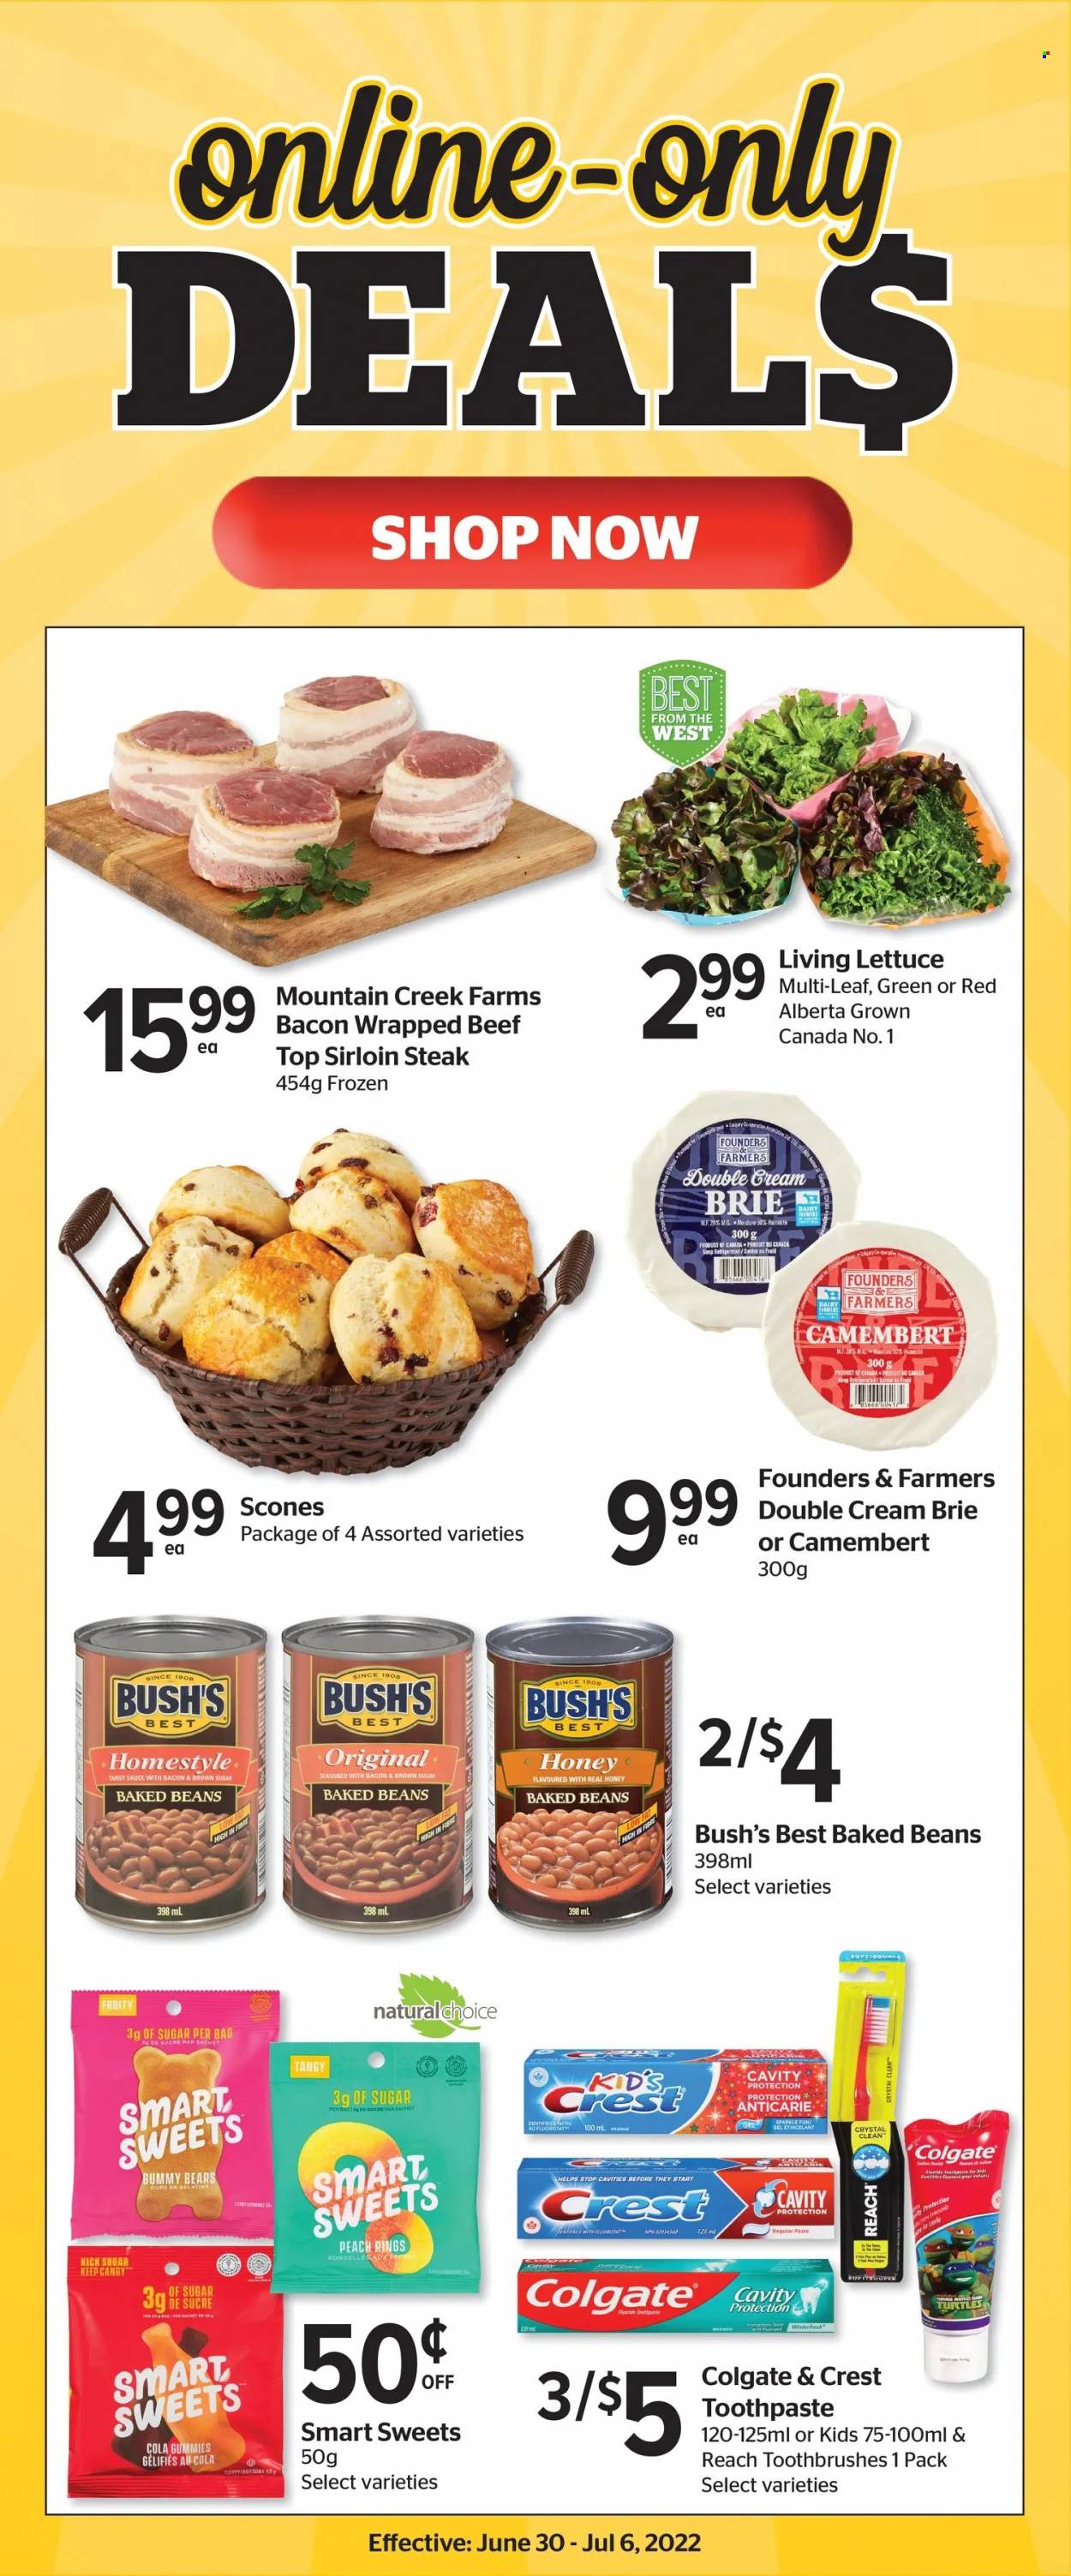 thumbnail - Calgary Co-op Flyer - June 30, 2022 - July 06, 2022 - Sales products - beans, lettuce, sauce, brie, cane sugar, baked beans, honey, beef sirloin, sirloin steak, toothpaste, Crest, bag, turtles, camembert, Canon, Colgate, steak. Page 4.